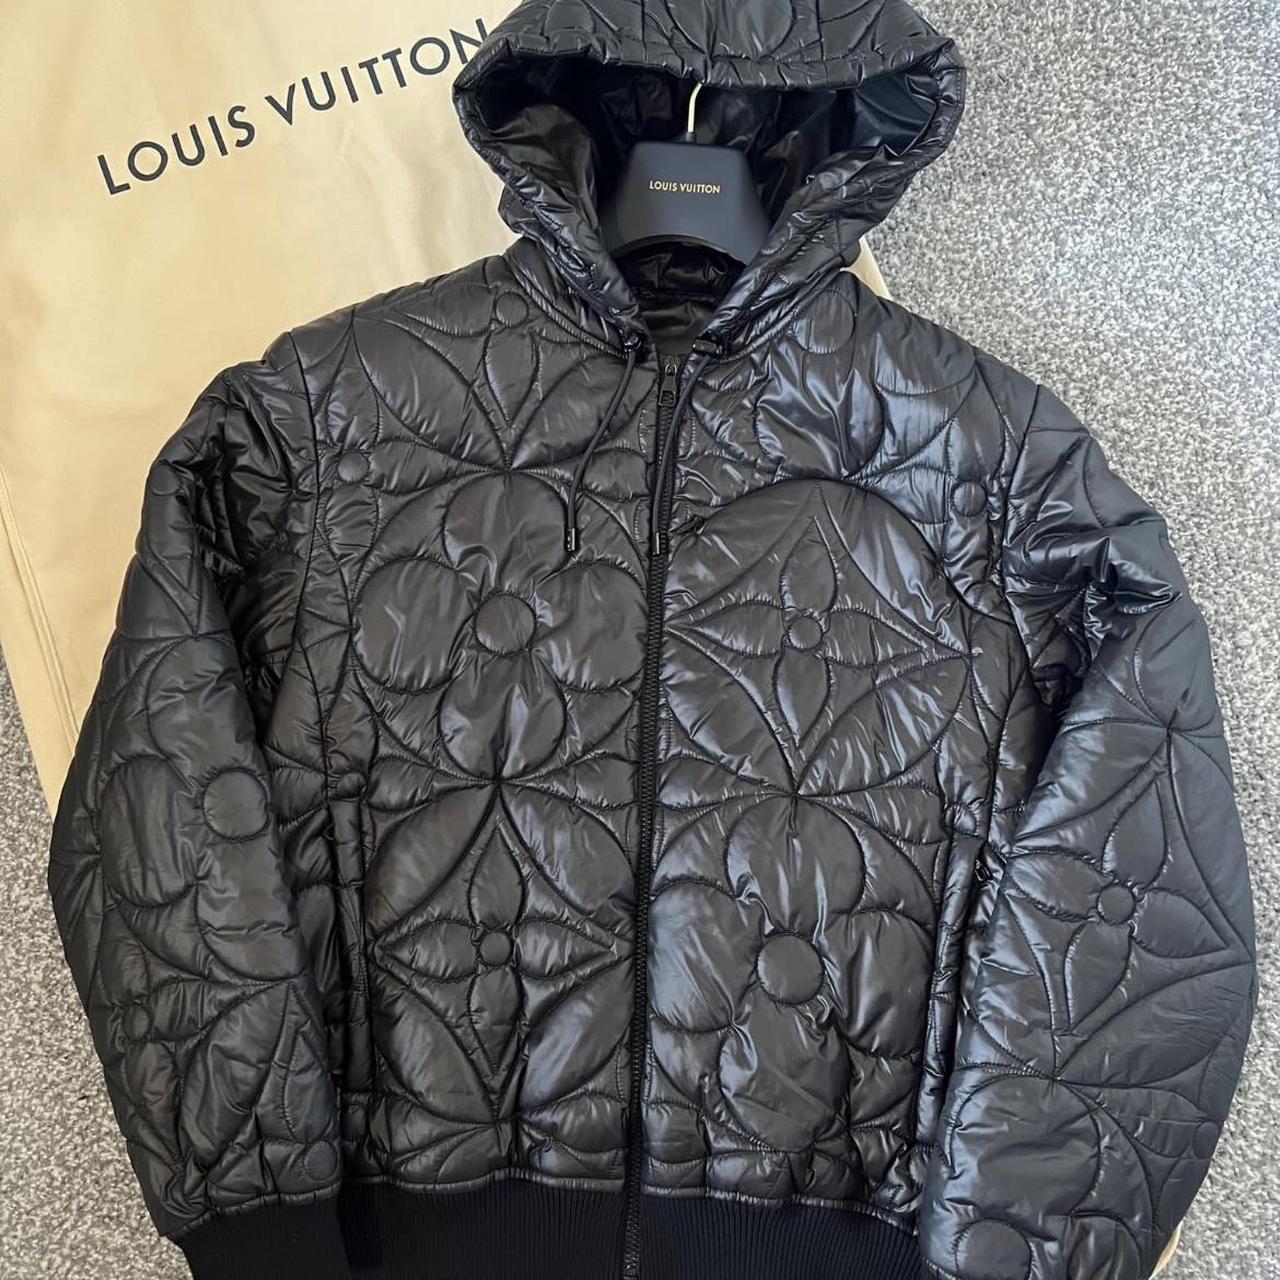 Buy Louis Vuitton LOUISVUITTON Size: 46 18SS RM181 GED HEJ74W Color  switching tailored jacket from Japan - Buy authentic Plus exclusive items  from Japan